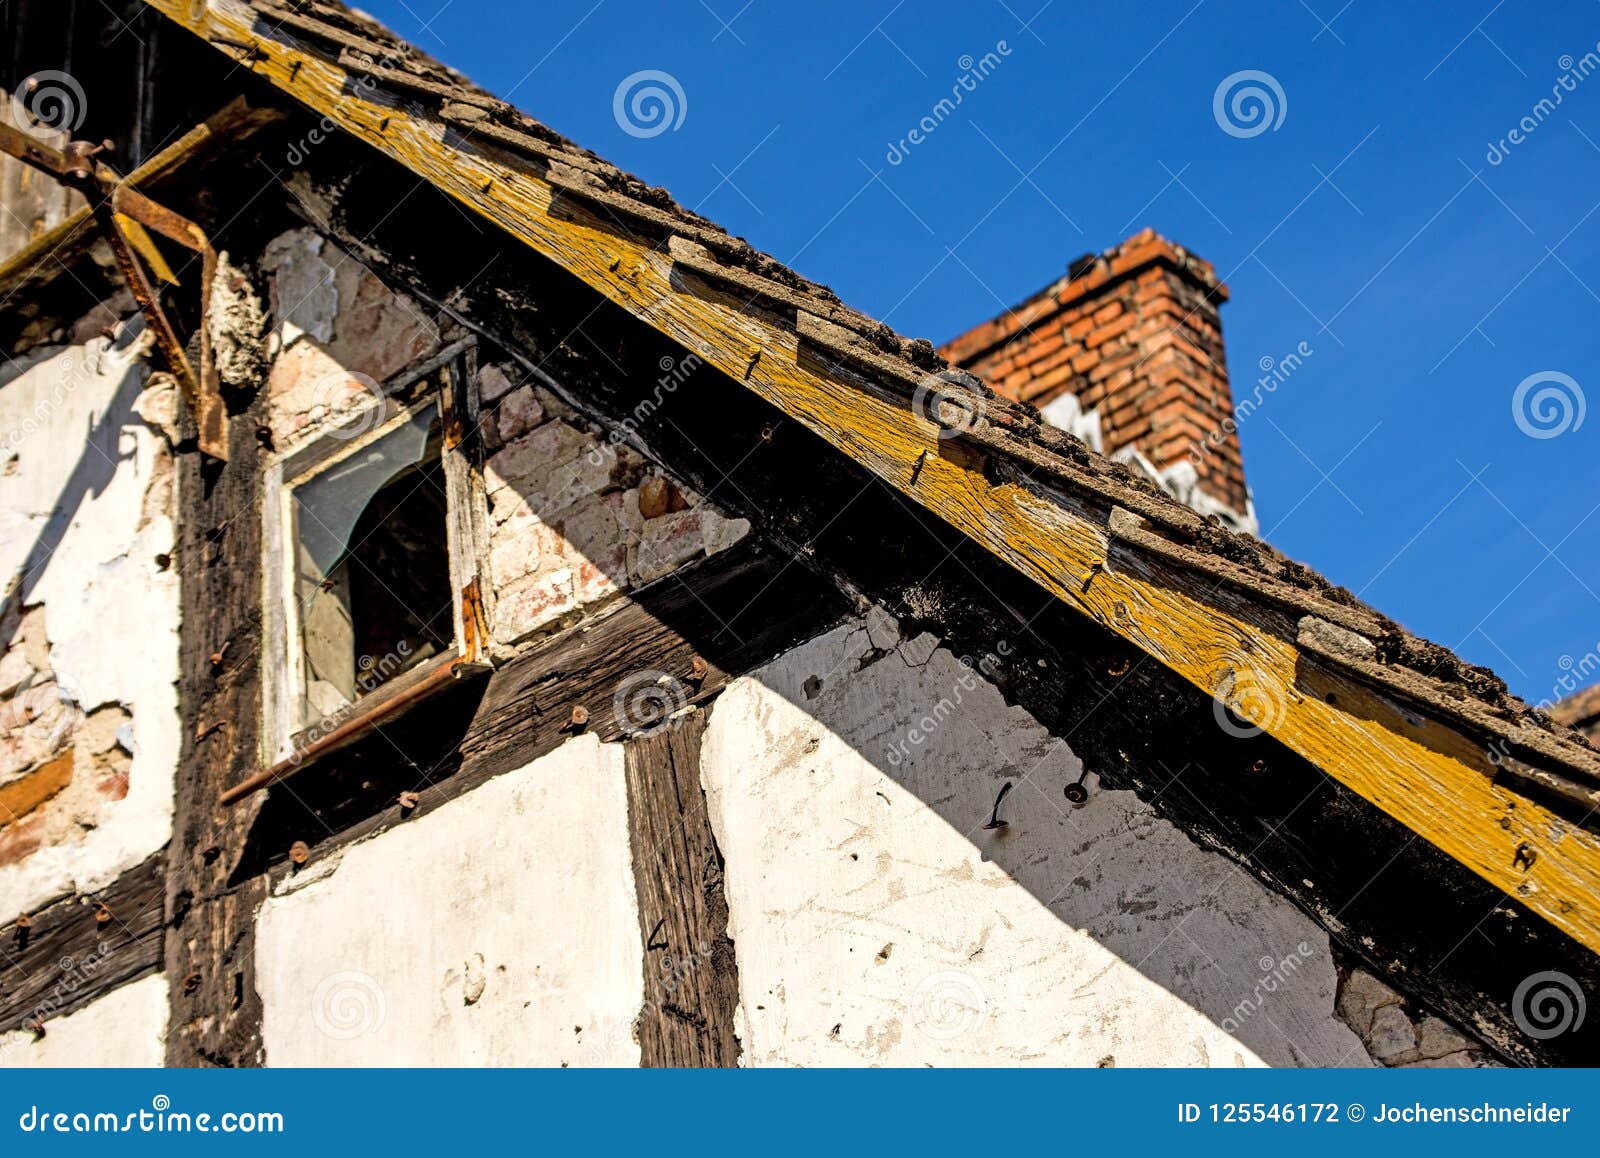 old house, frame house with damages